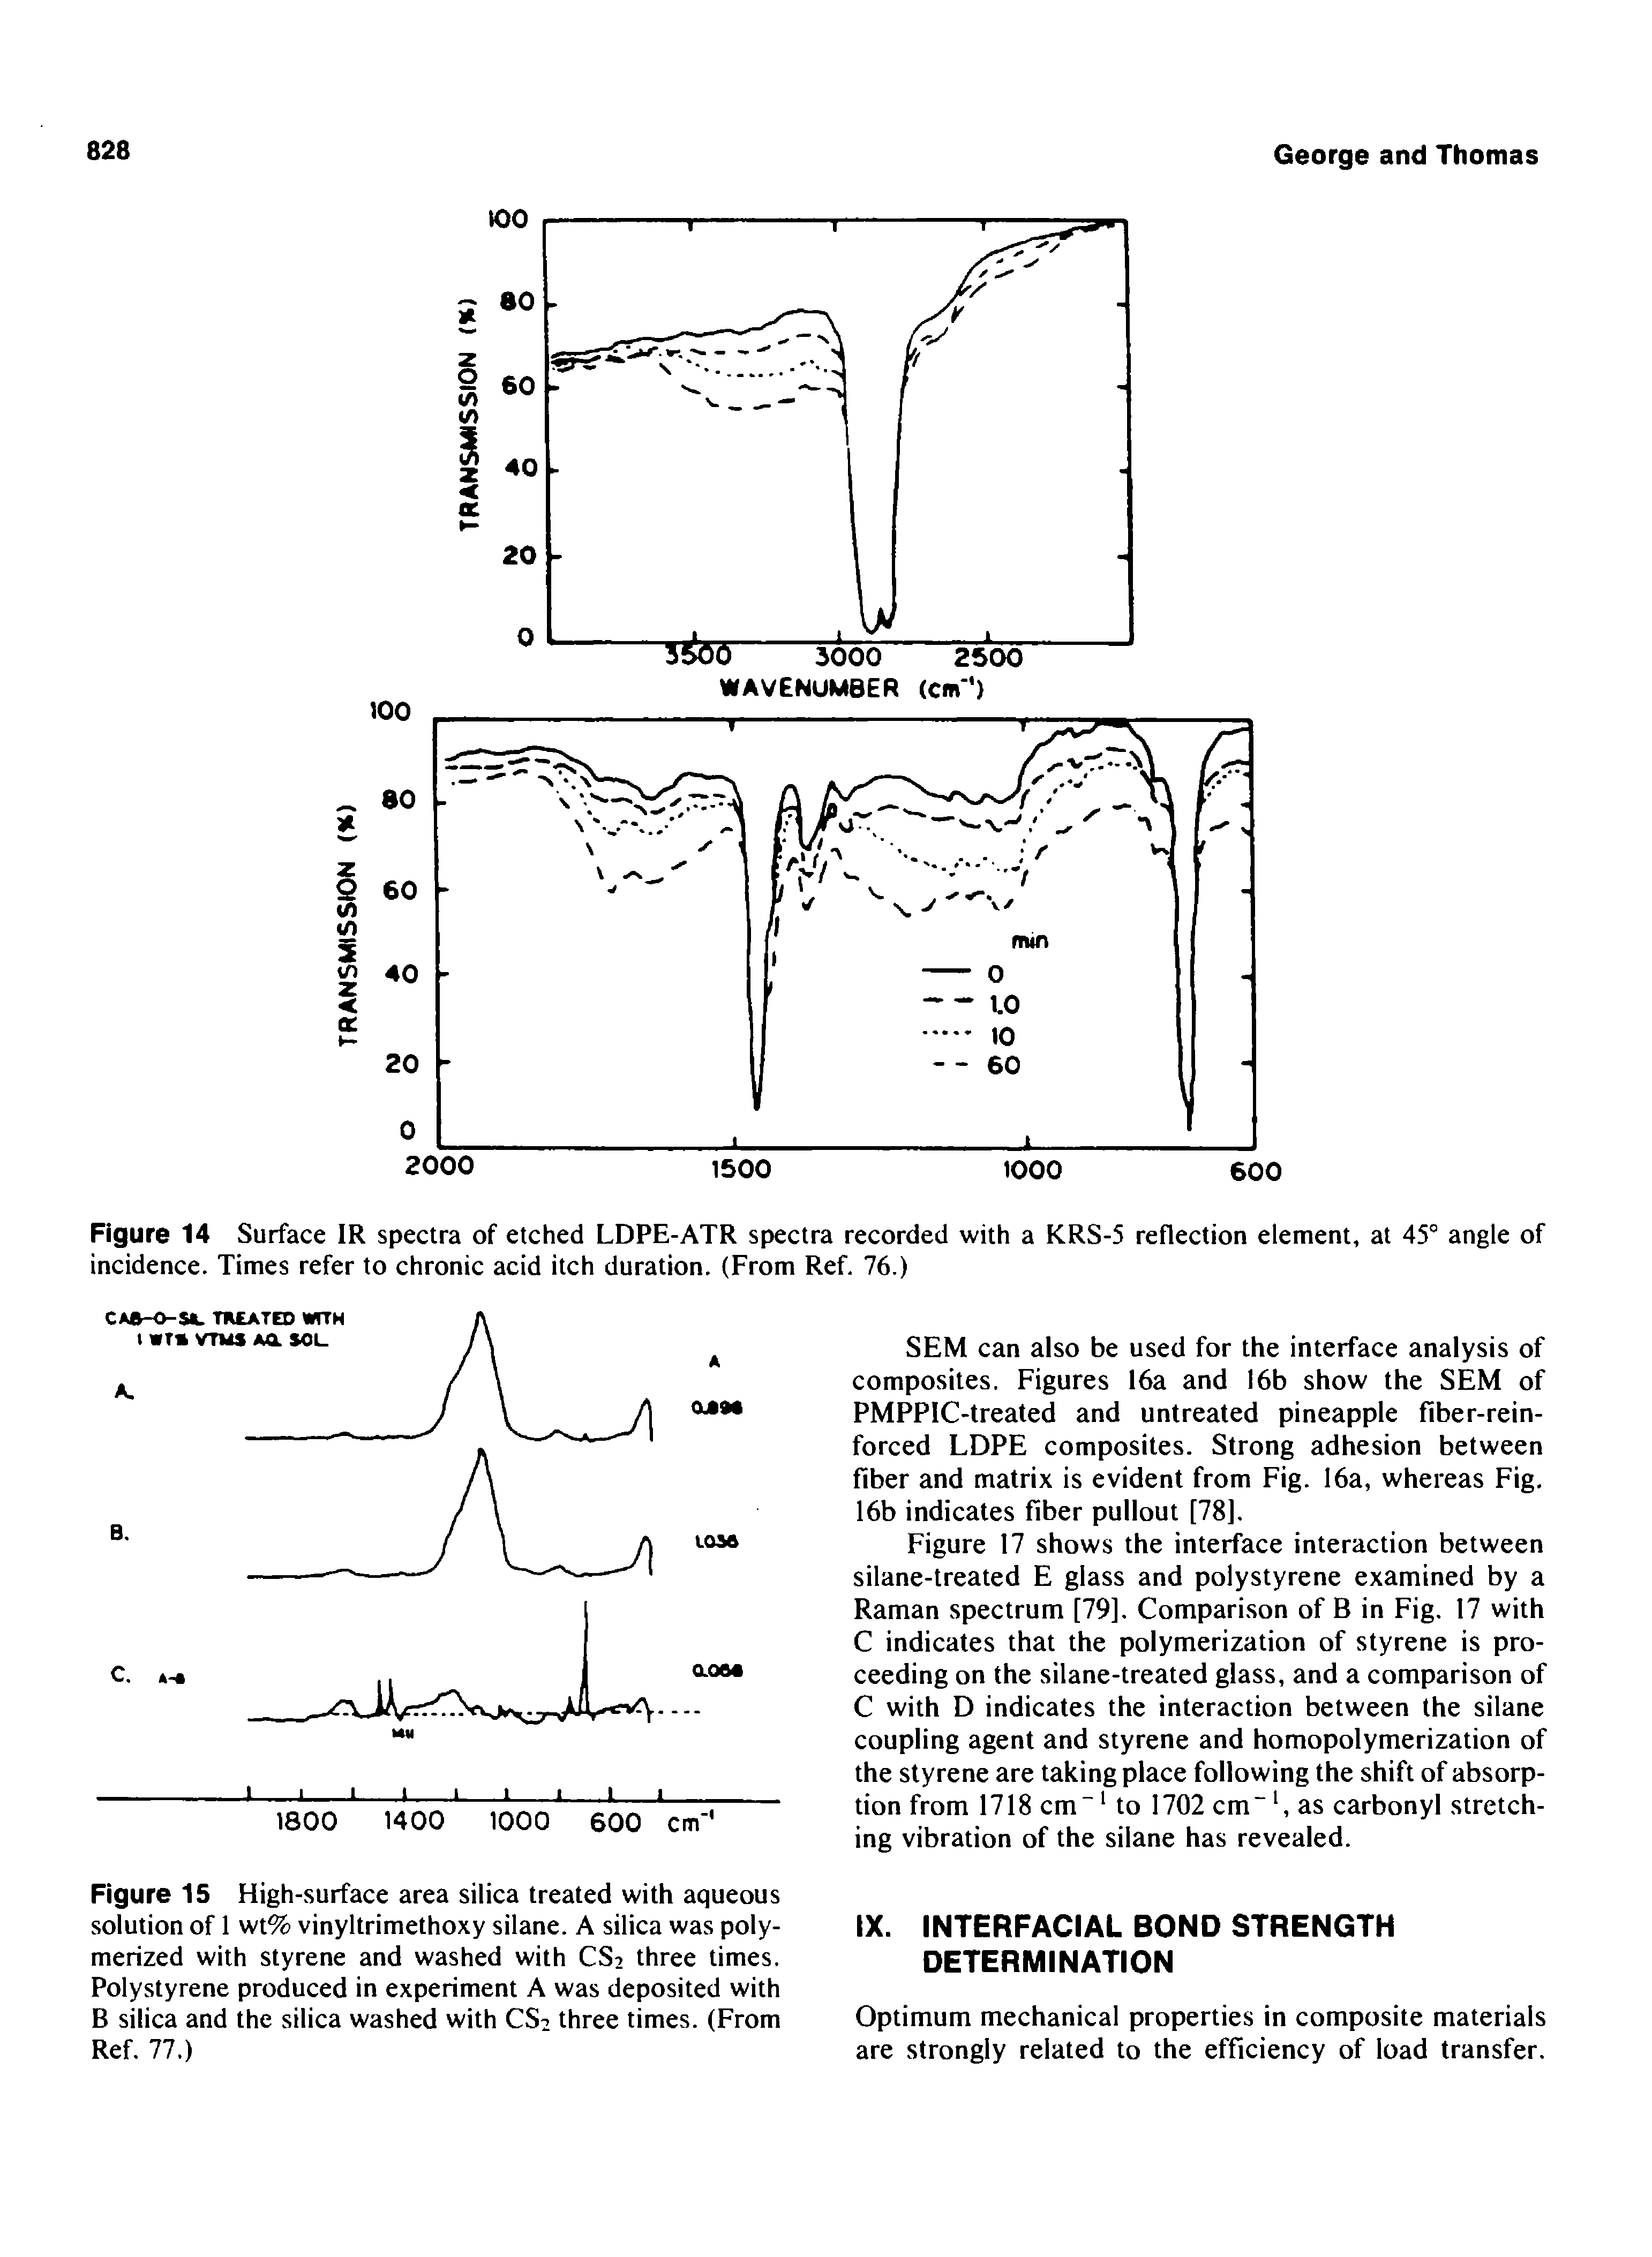 Figure 14 Surface IR spectra of etched LDPE-ATR spectra recorded with a KRS-5 reflection element, at 45° angle of incidence. Times refer to chronic acid itch duration. (From Ref. 76.)...